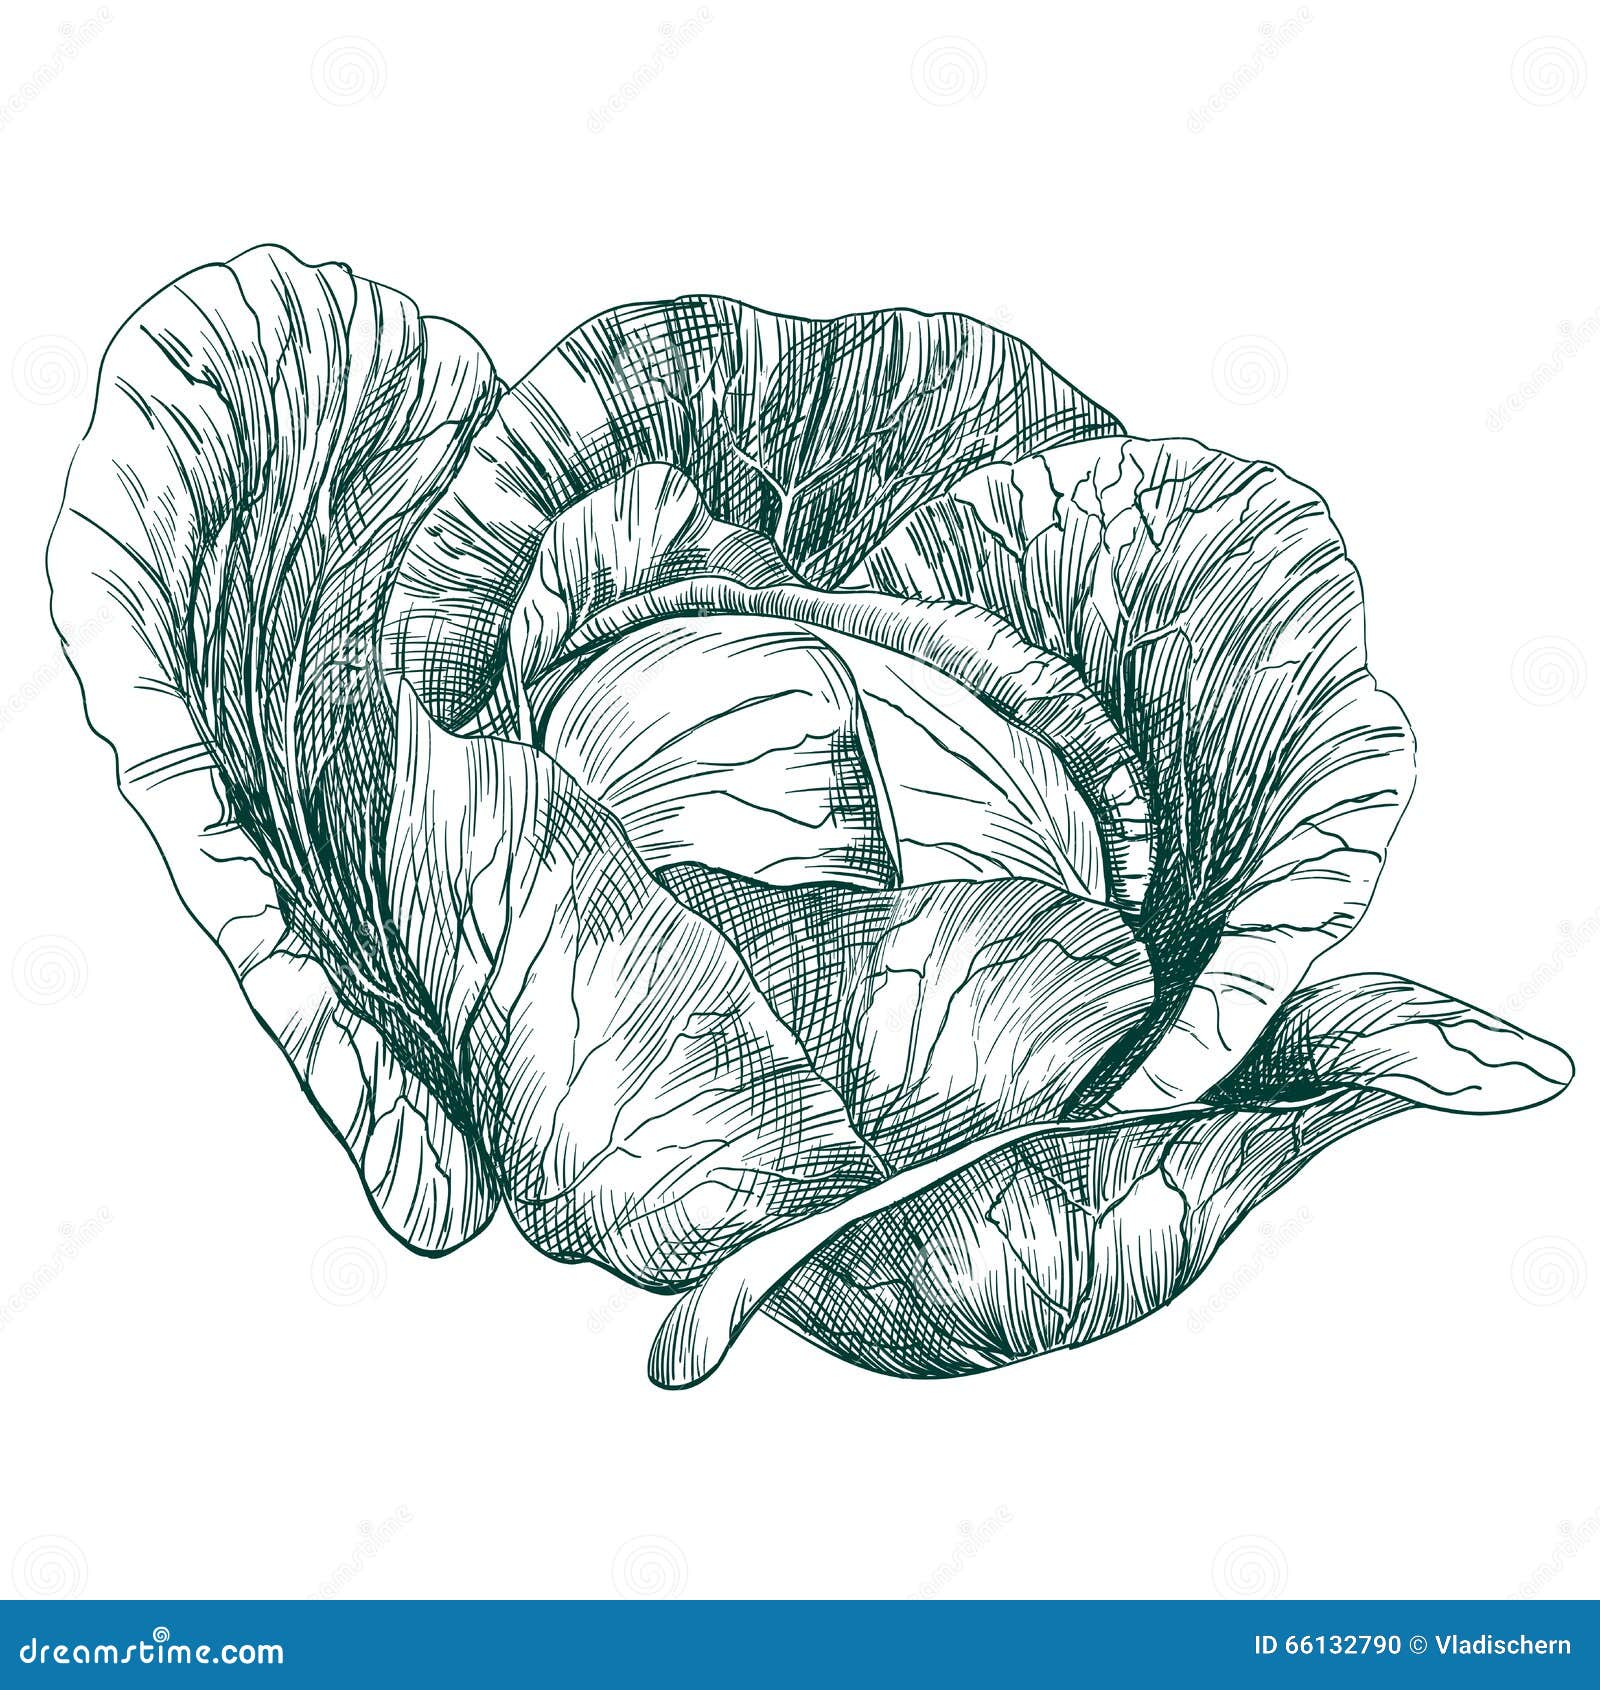 Discover more than 101 cabbage sketch